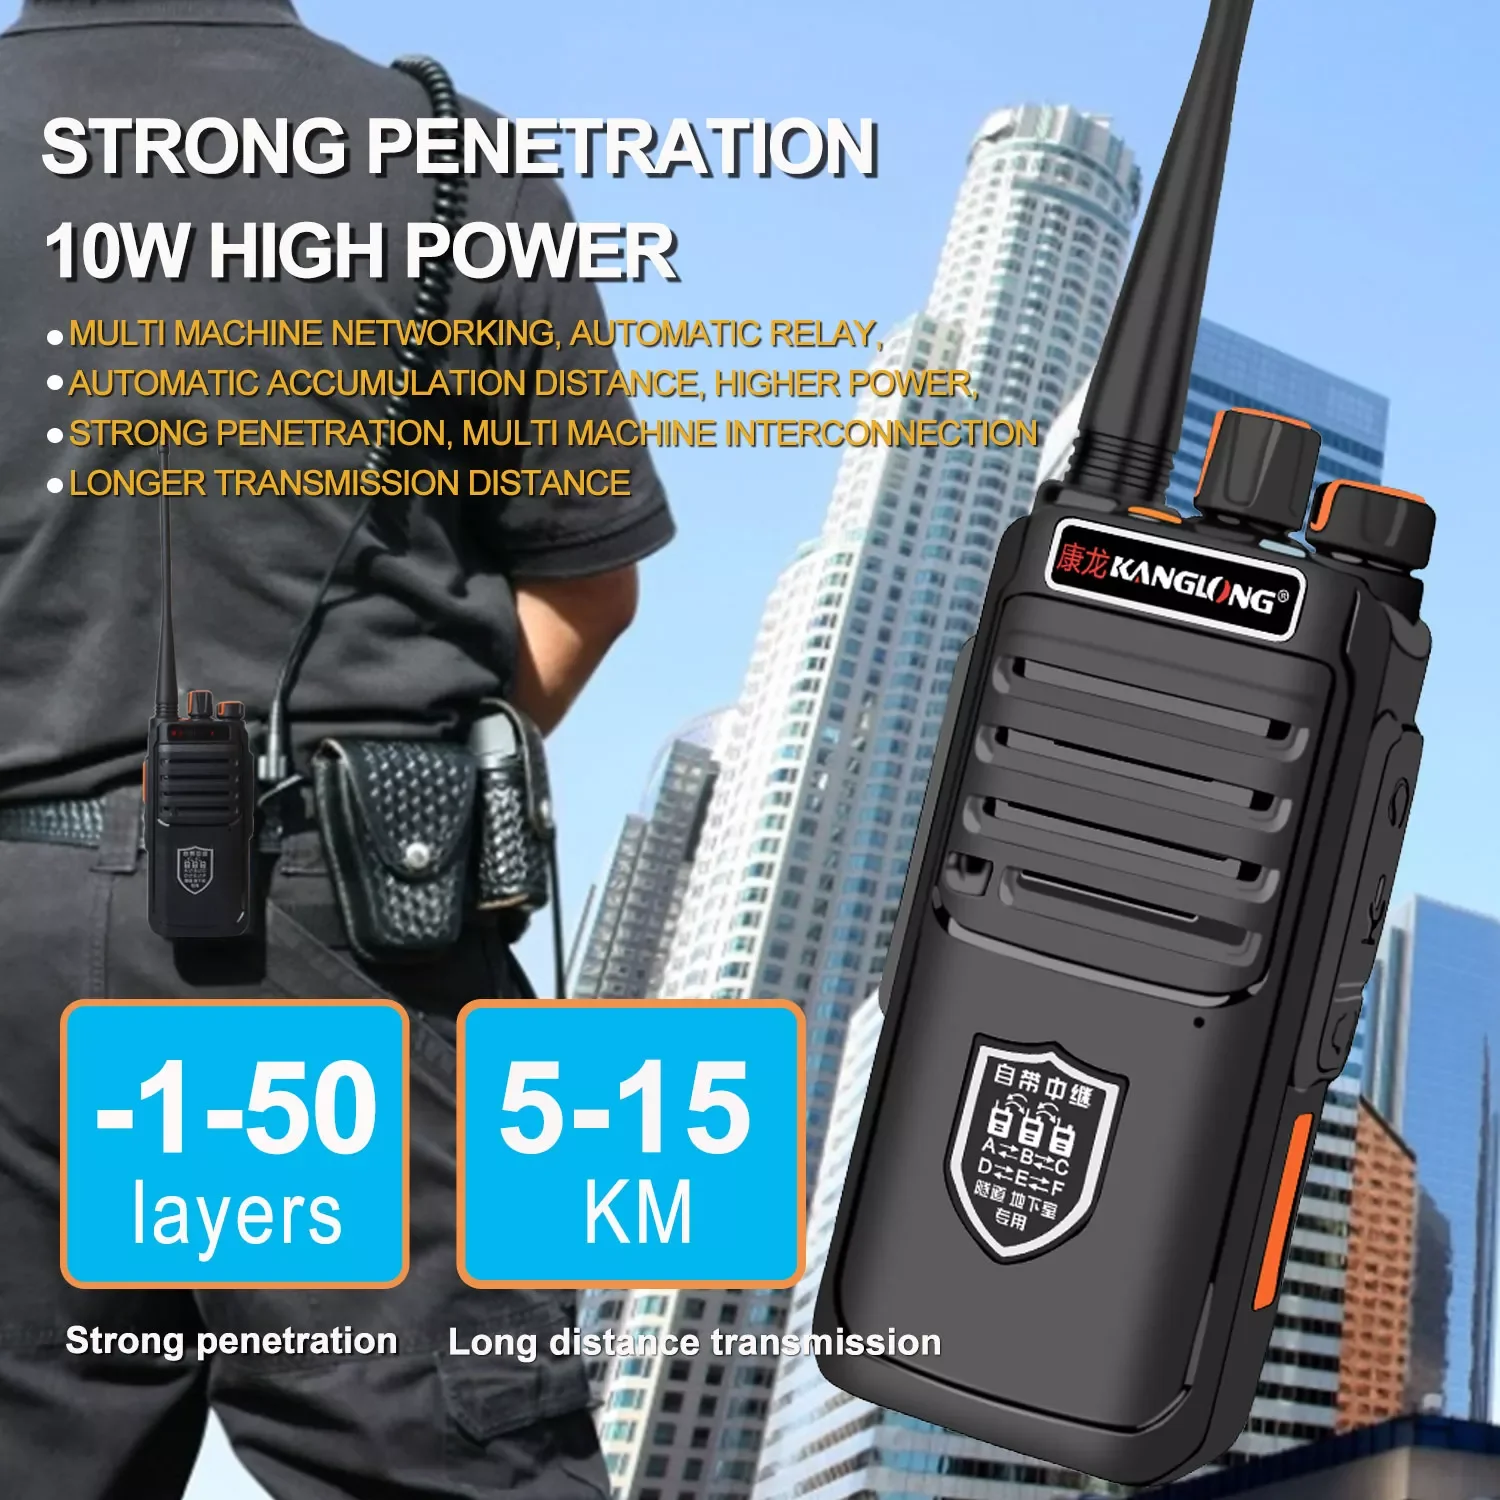 Powerful Portable Walkie Talkie UHF Repeater Transceiver Long Range Ham Two Way Radio Communicator with Repeater function enlarge